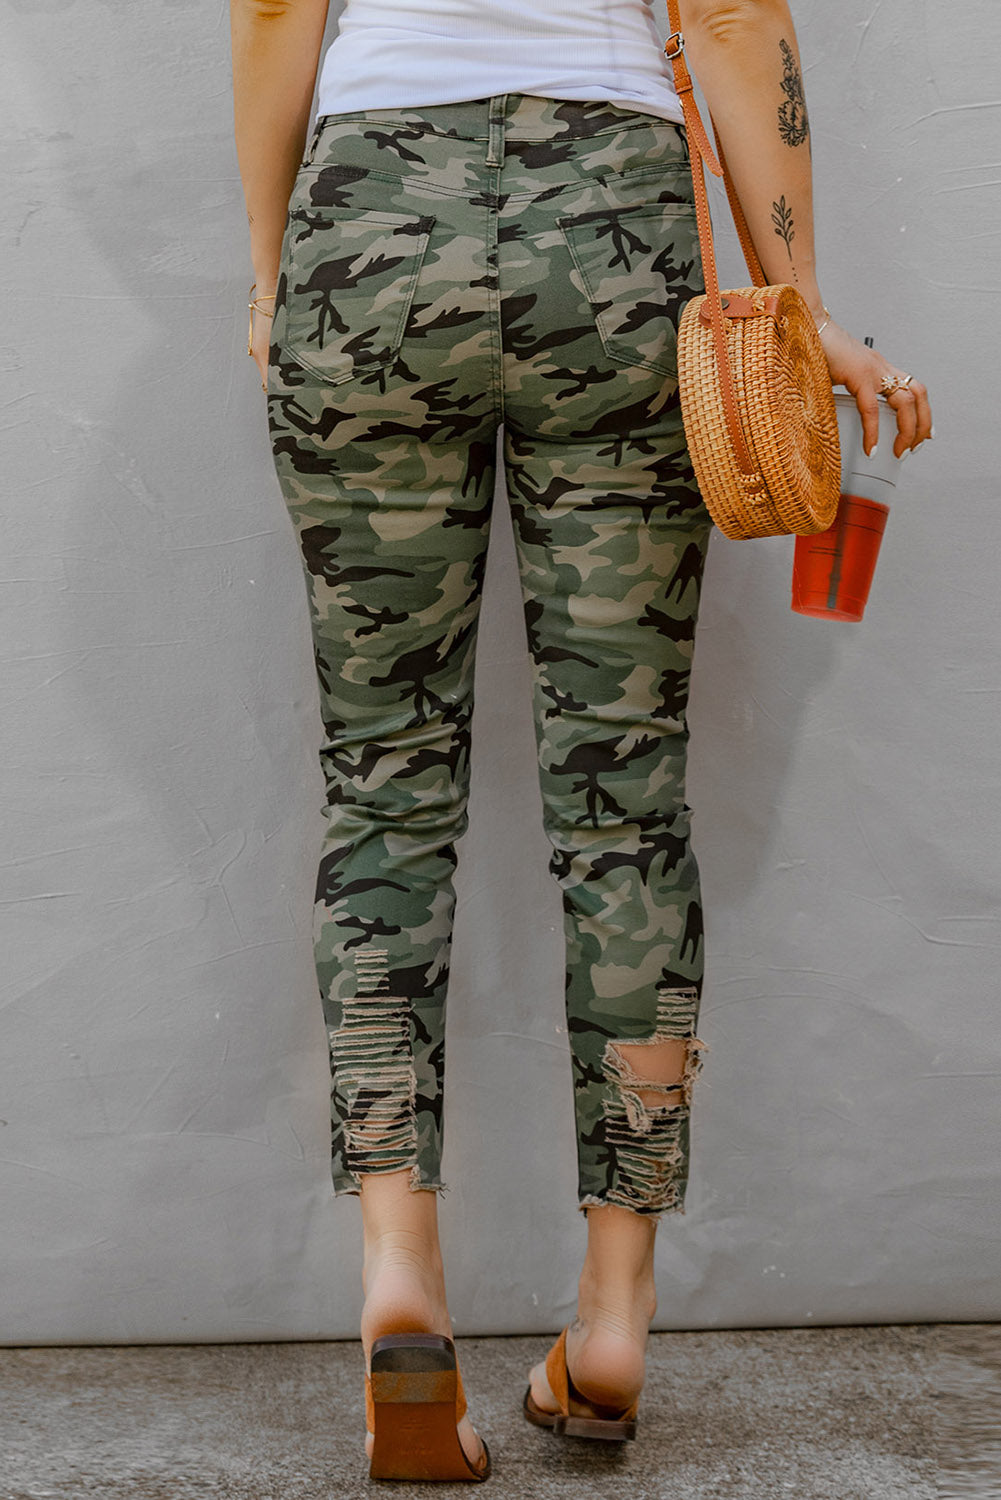 Green Camouflage Hollow out Ripped Skinny Jeans with Pockets for Women LC78149-9